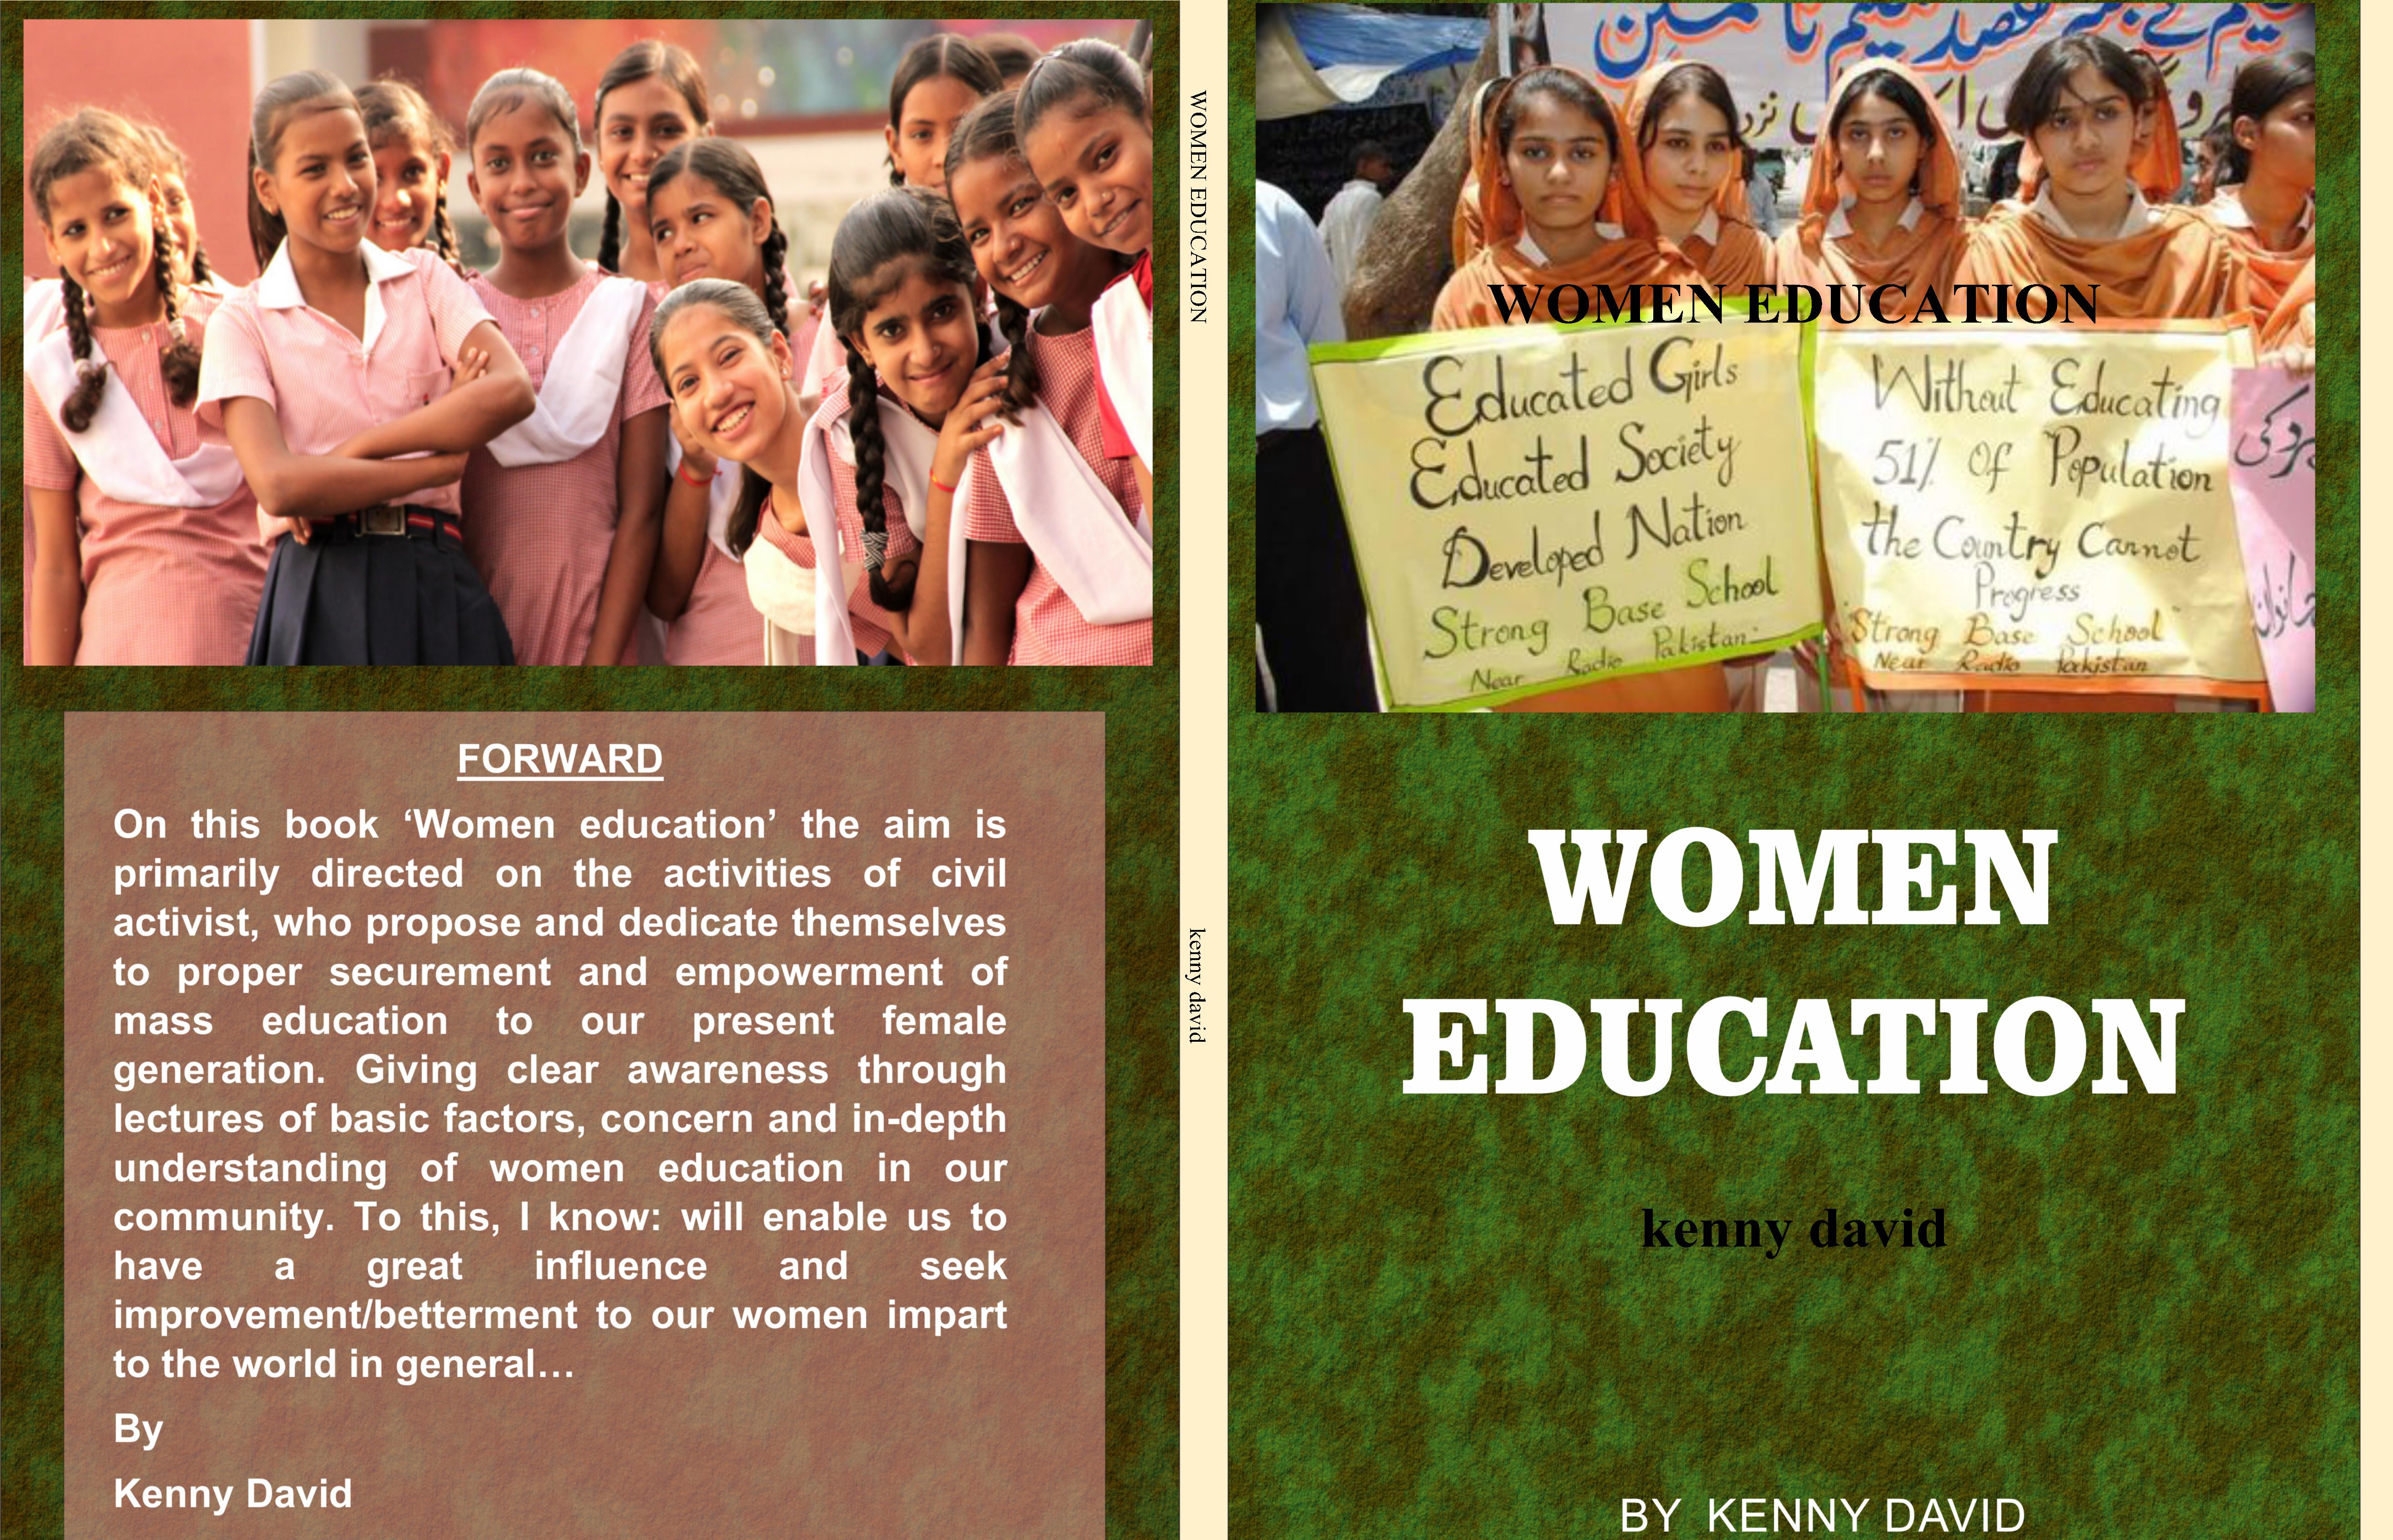 WOMEN EDUCATION cover image